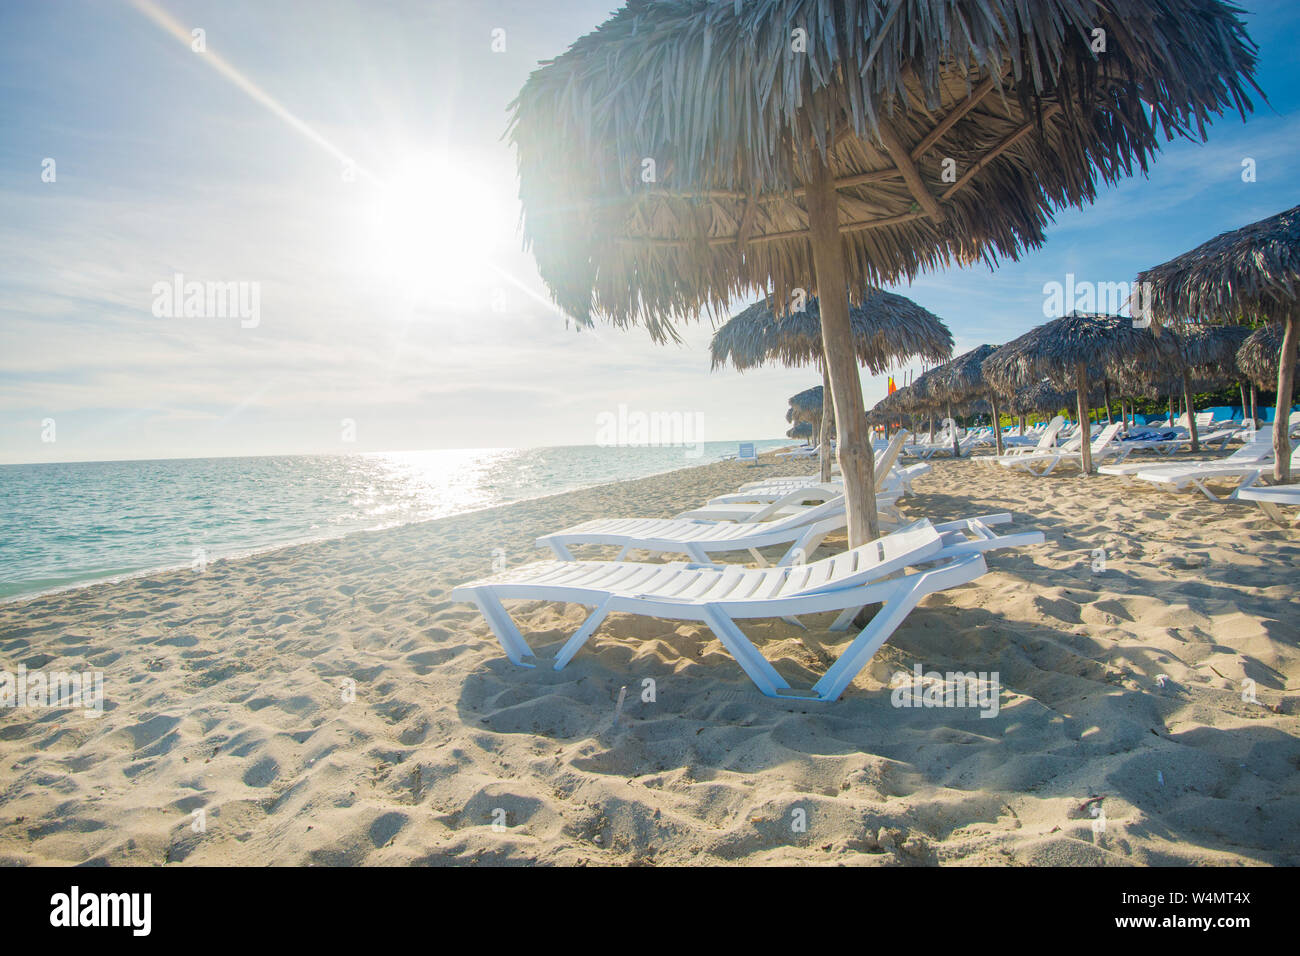 Caribbean Beaches. Hotels in Varadero, Cuba, are located close to beautiful beaches. The weather is hot and the sunsets are spectacular. Stock Photo